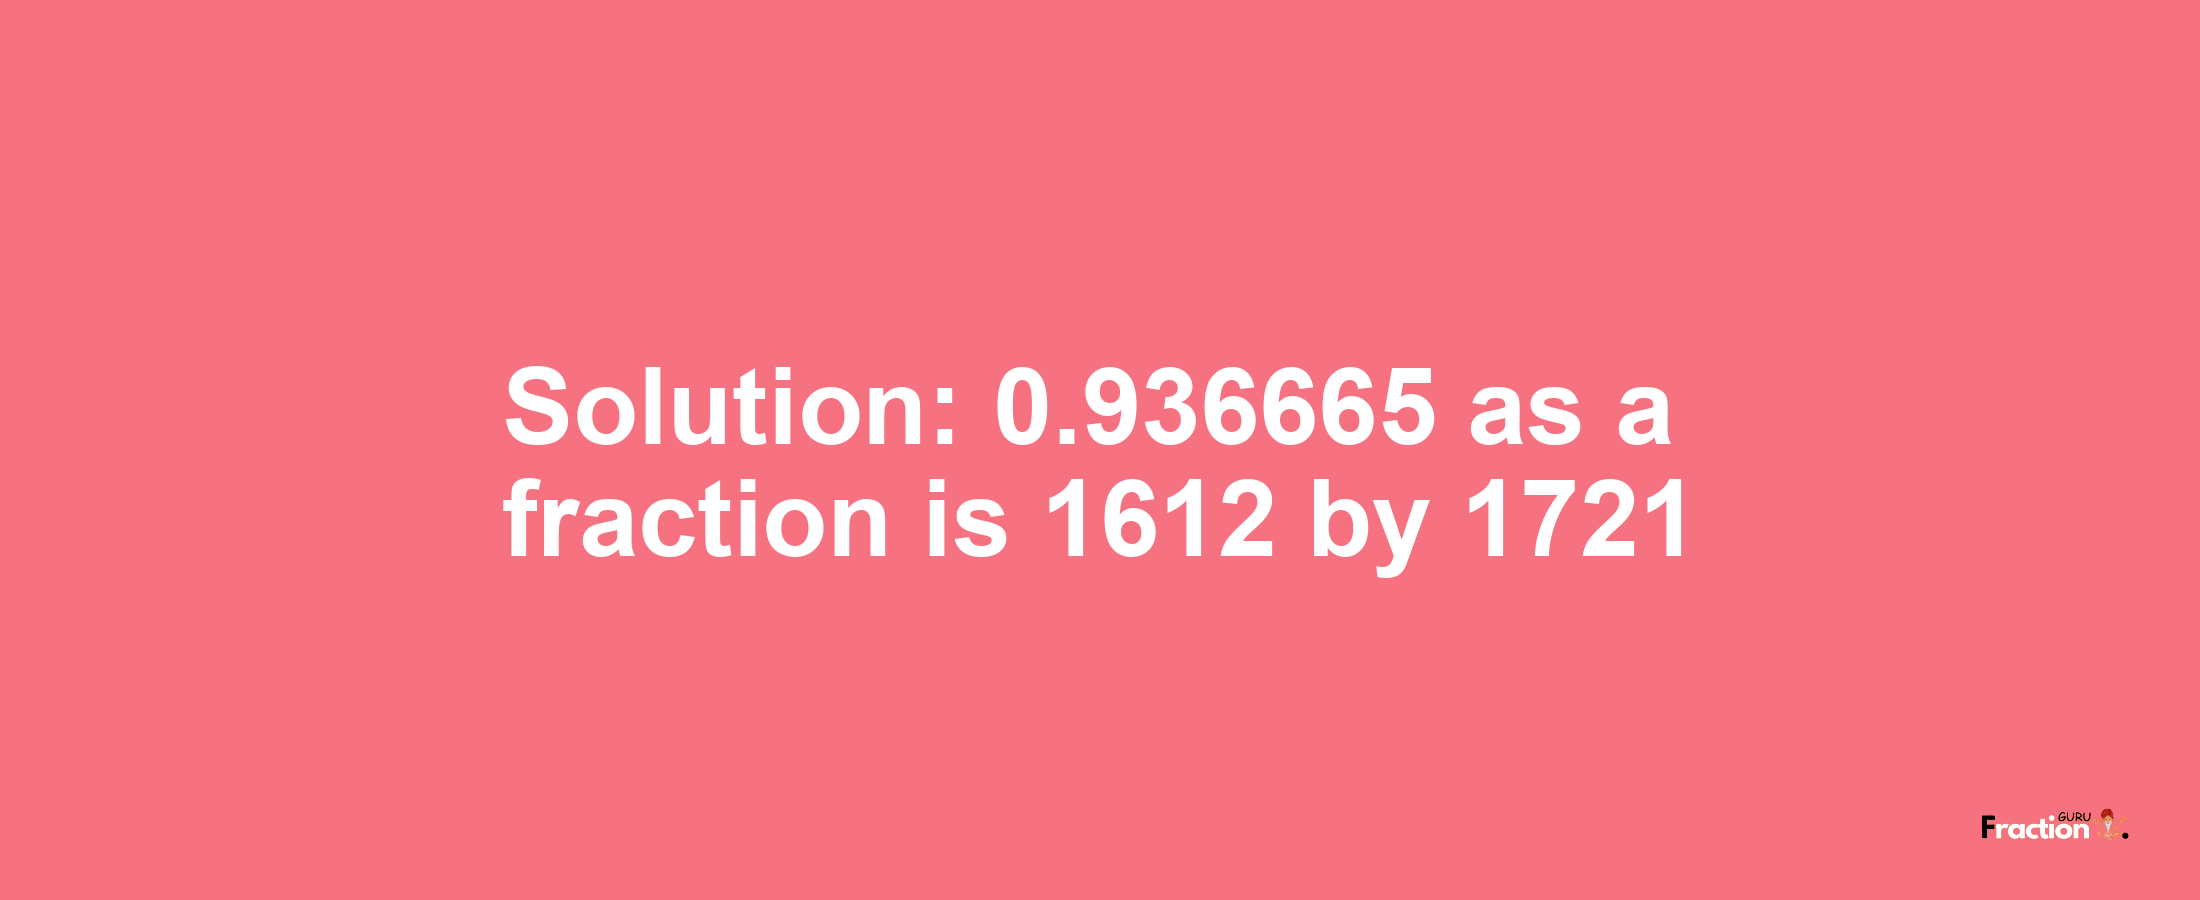 Solution:0.936665 as a fraction is 1612/1721